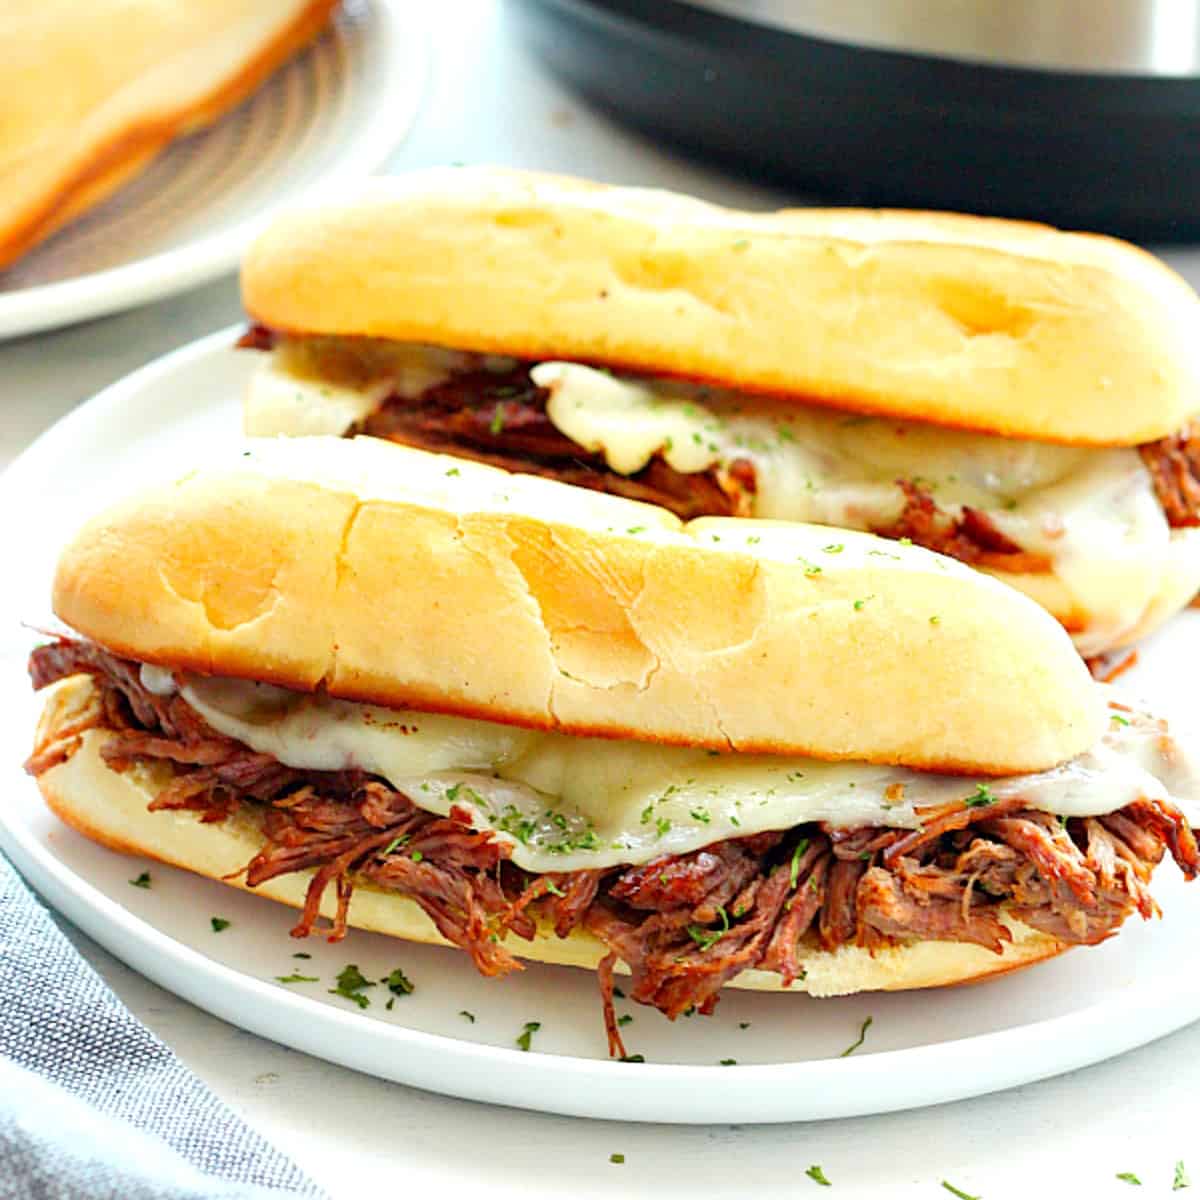 French Dip sandwiches on a plate, next to Instant Pot.